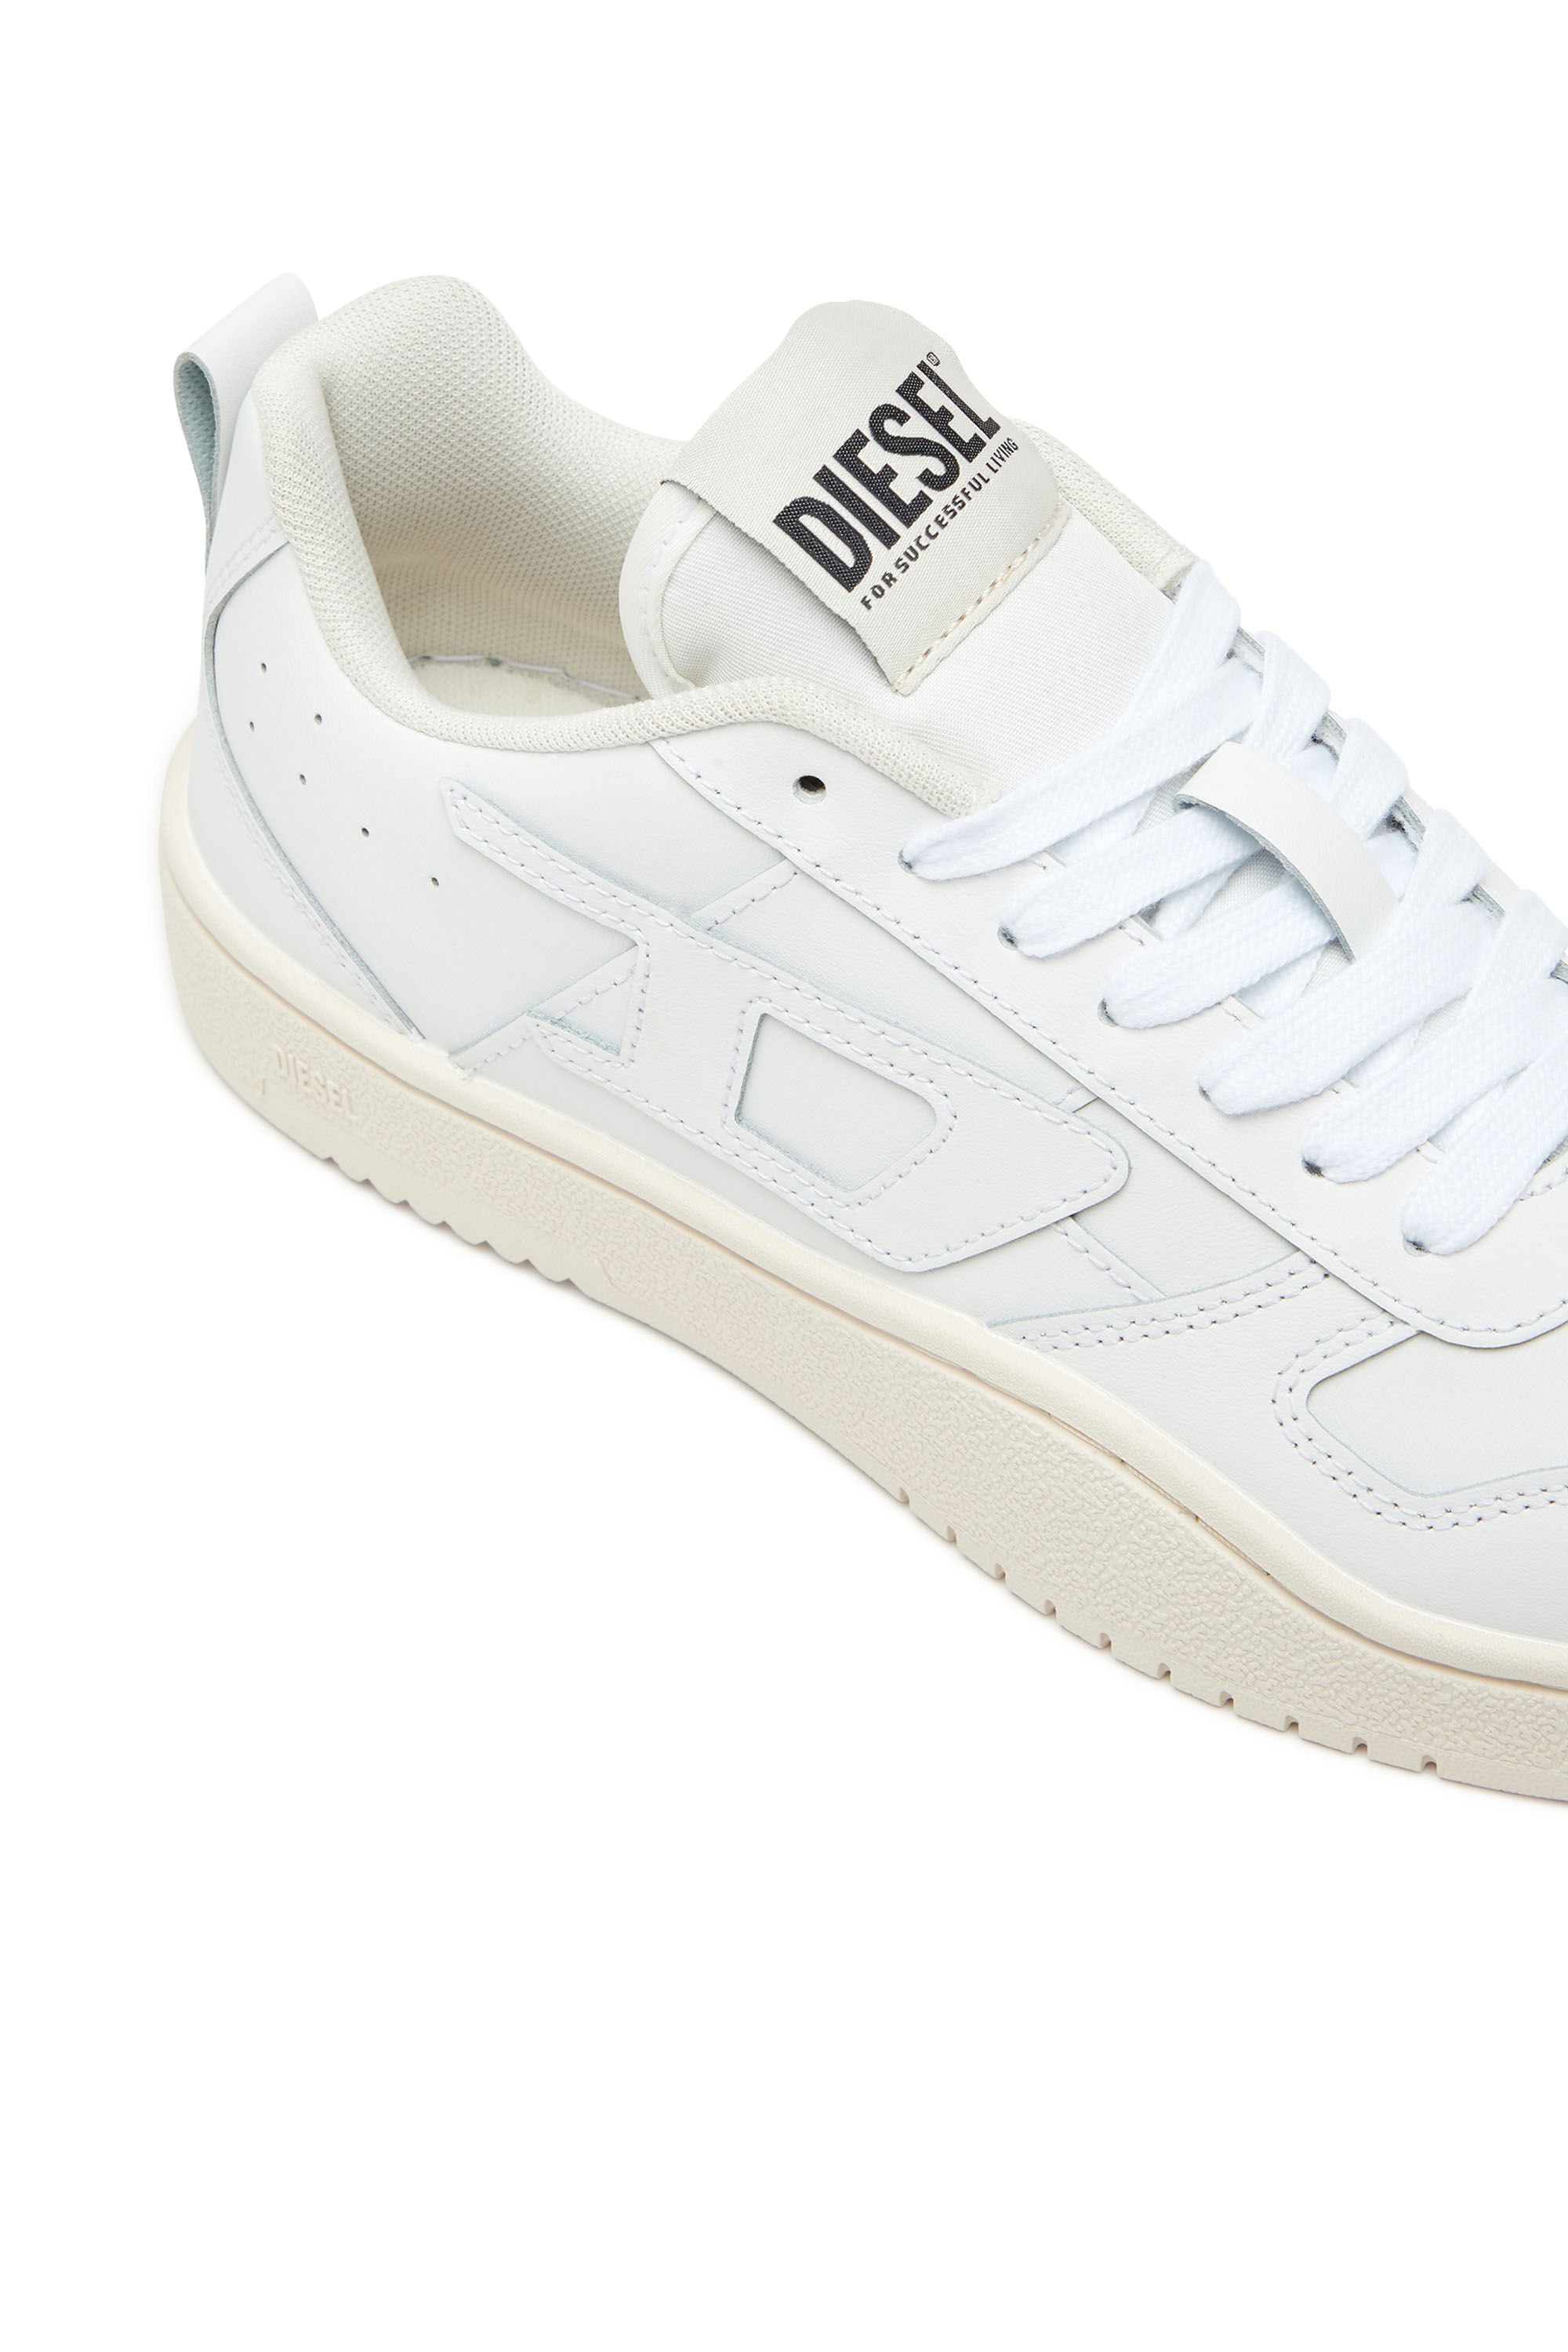 Diesel - S-UKIYO V2 LOW, Man S-Ukiyo Low-Low-top sneakers in leather and nylon in White - Image 6